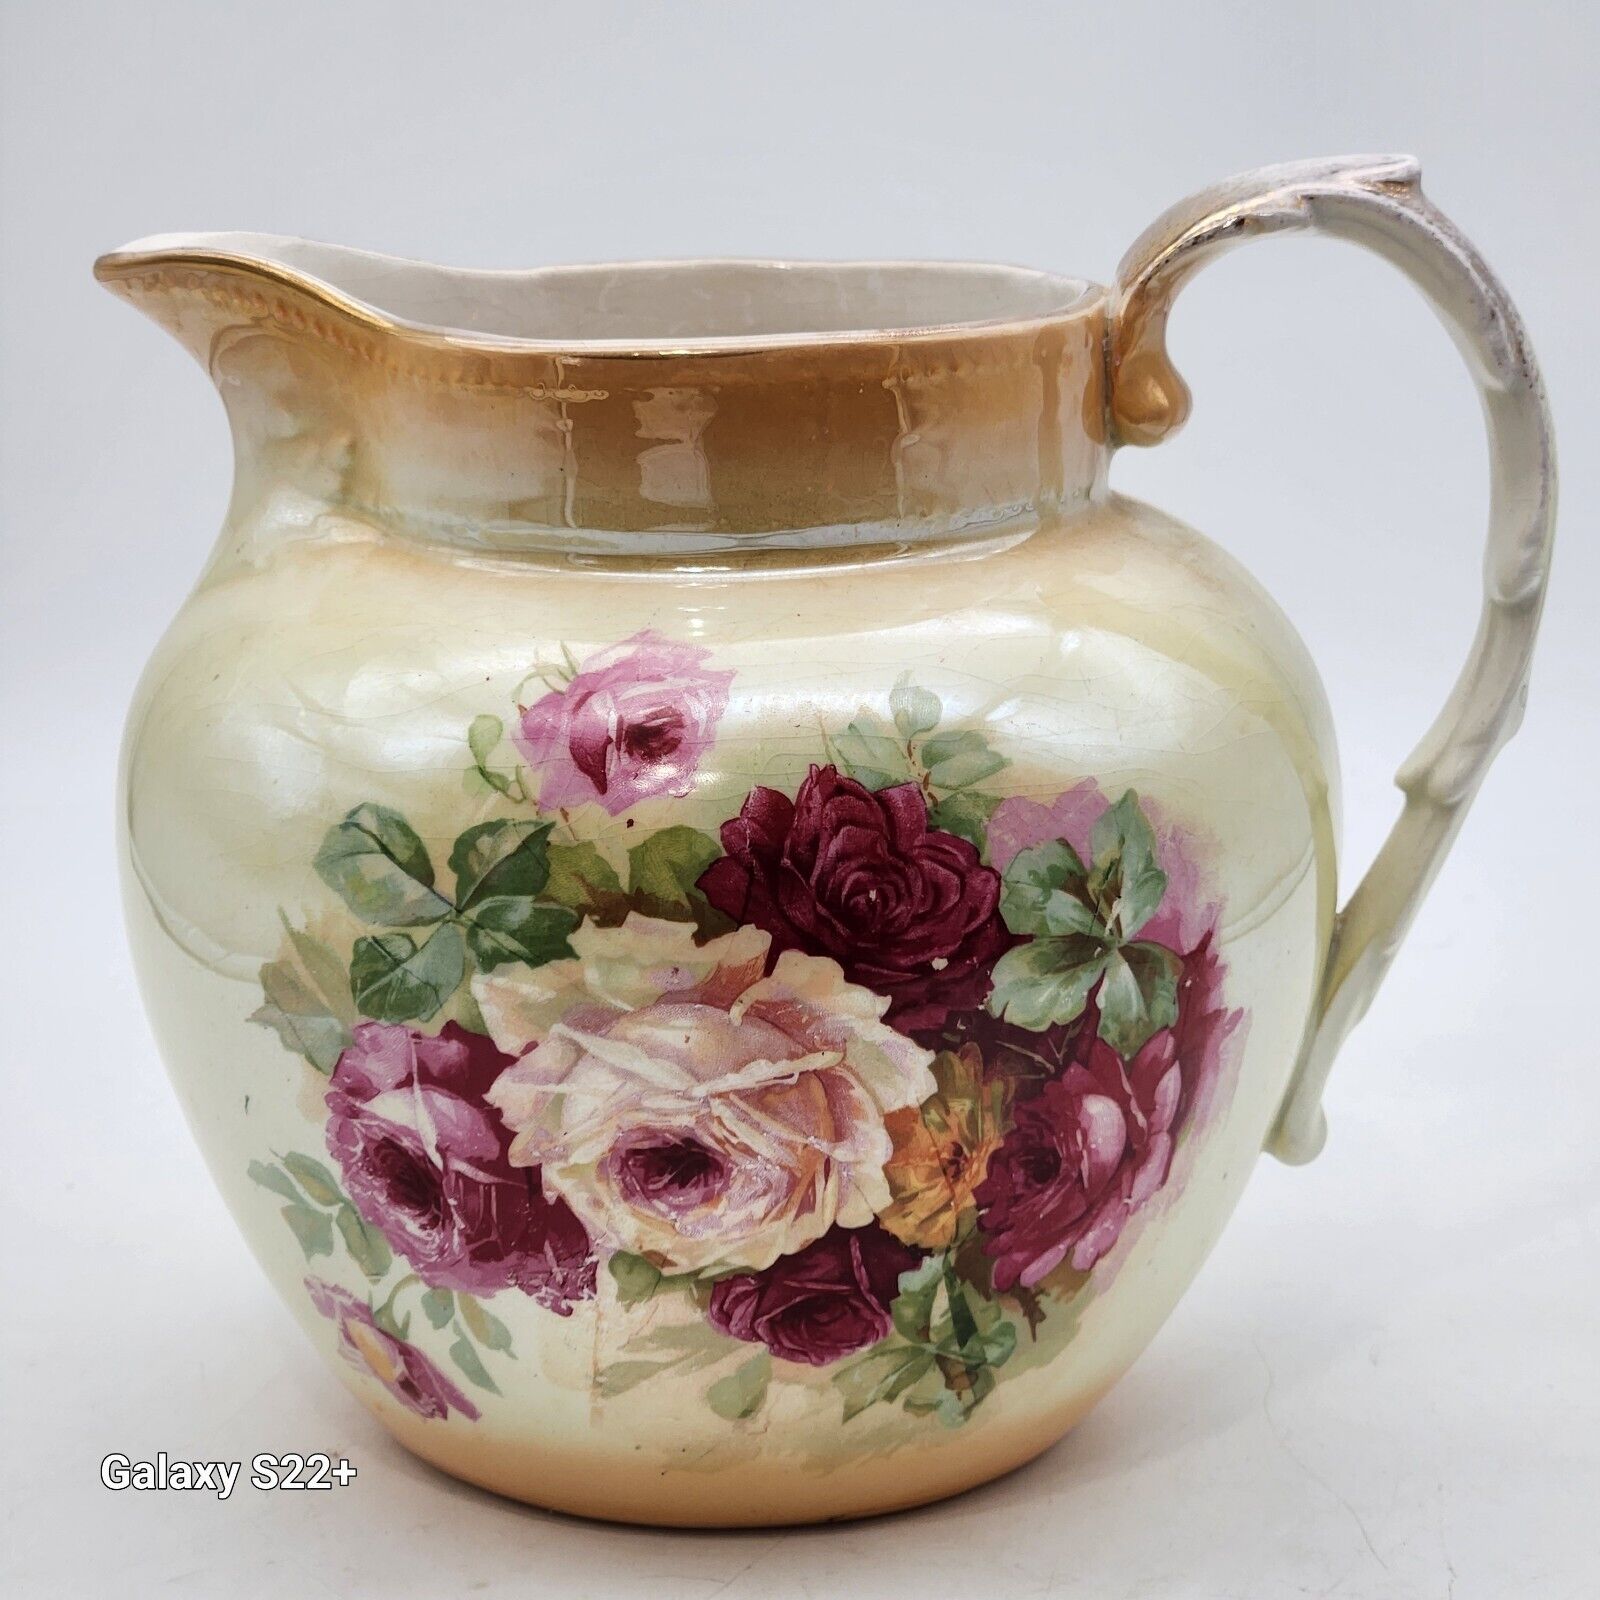 Antique Stinthal PITCHER LUSTERWARE HANDPAINTED PINK ROSES Gold Trim #1069